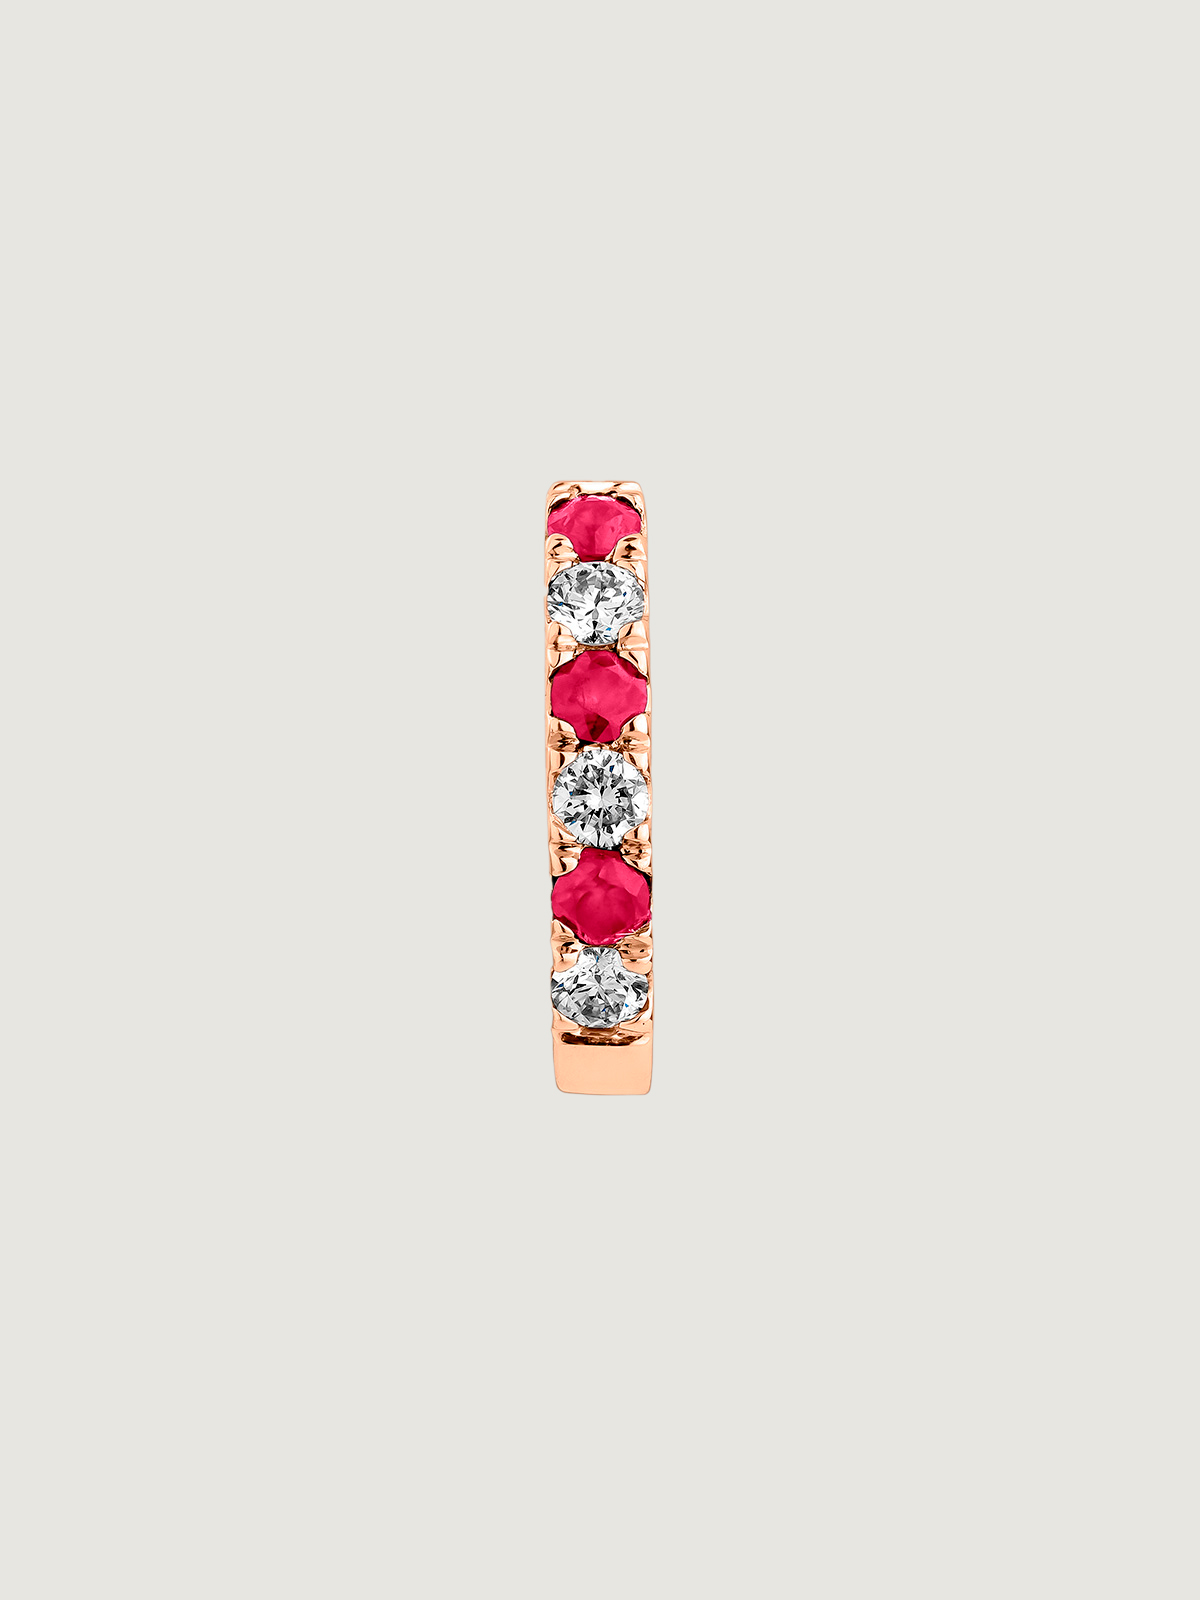 Single 9K rose gold hoop earring with rubies and diamonds.